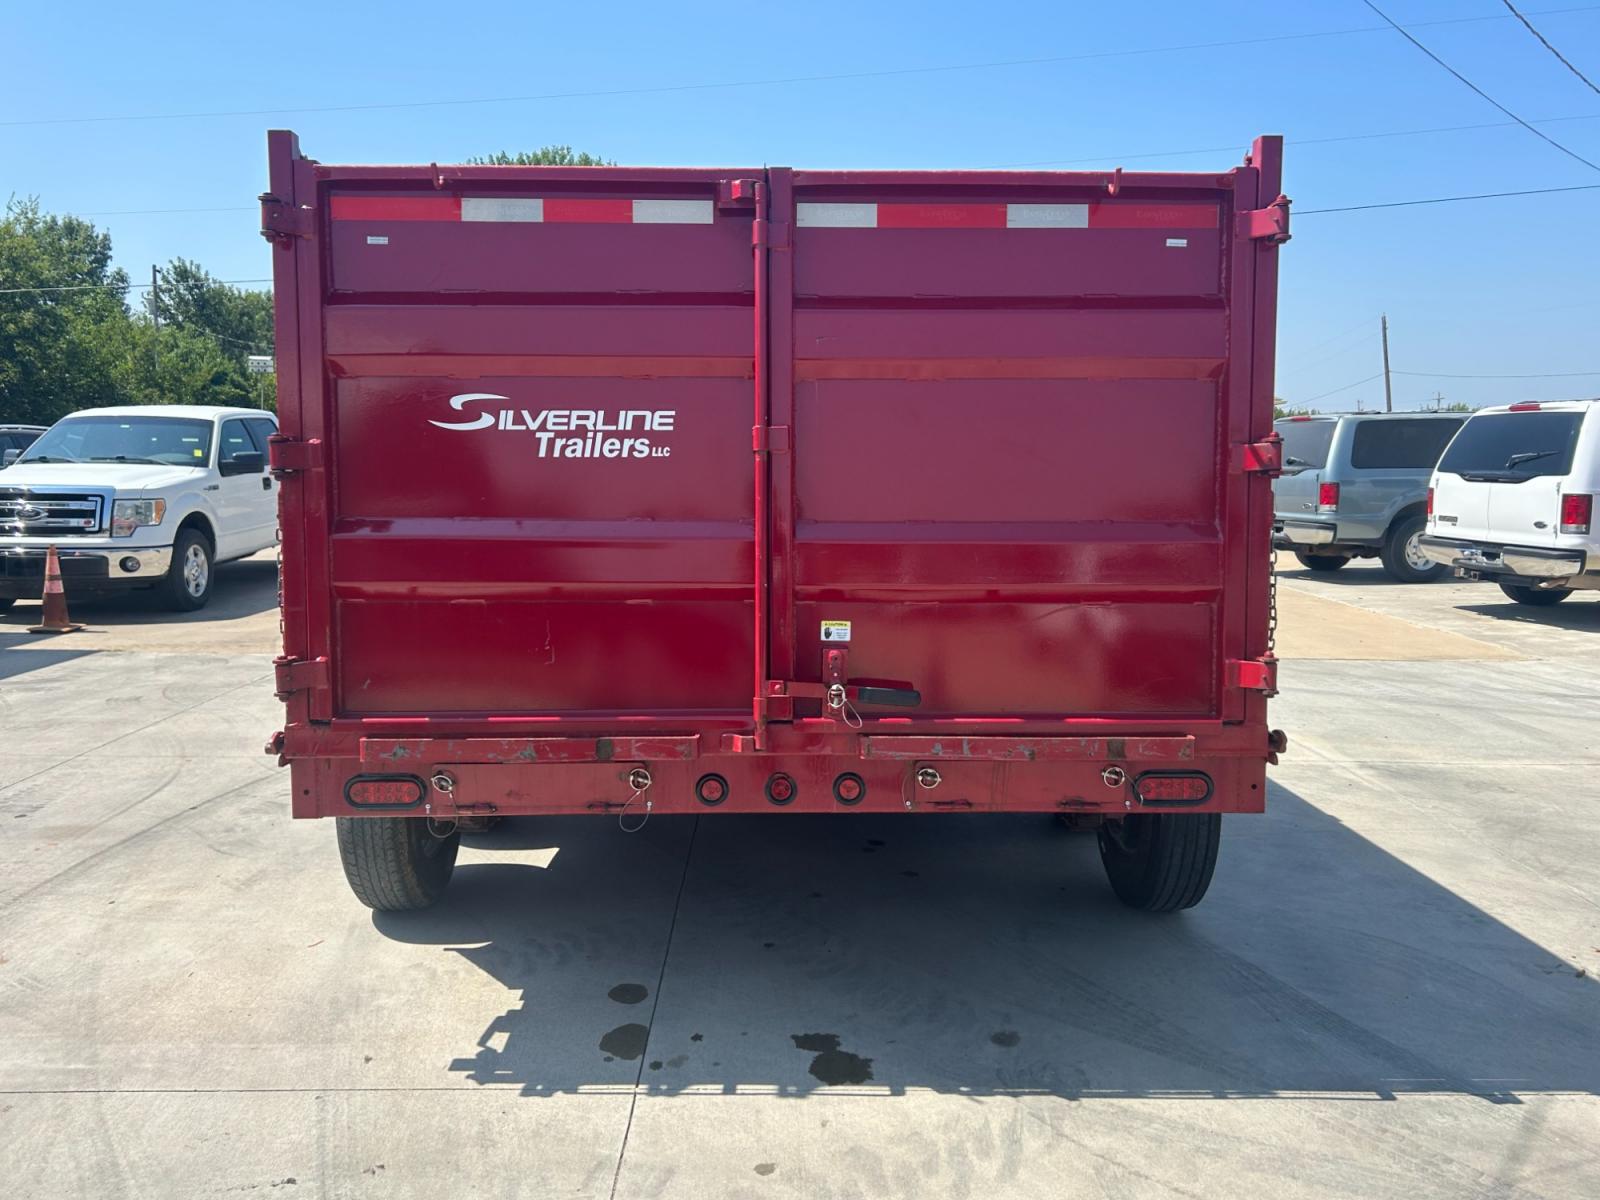 2022 RED EAST TEXAS TRAILER DUMPBED (58SBD1420NE) , located at 17760 Hwy 62, Morris, OK, 74445, 35.609104, -95.877060 - 2022 SILVERLINE TRAILER 83X14 FEATURES 2 7,000 LB DEXTER SPRING AXLES, 2 ELEC FSA BRAKES, COUPLER 2-5/16" ADJUSTABLE (6 HOLE), DIAMOND PLATE FENDERS, 16" CROSS-MEMBERS, 48" DUMP SIDES, 48" 3 WAY GATE, MESH ROLL TARP SYSTEM, JACK SPRING LOADED DROP LEG, 4 3'' D-RINGS, TOOL BOX IN TONGUE, SCISSOR HOIS - Photo #4